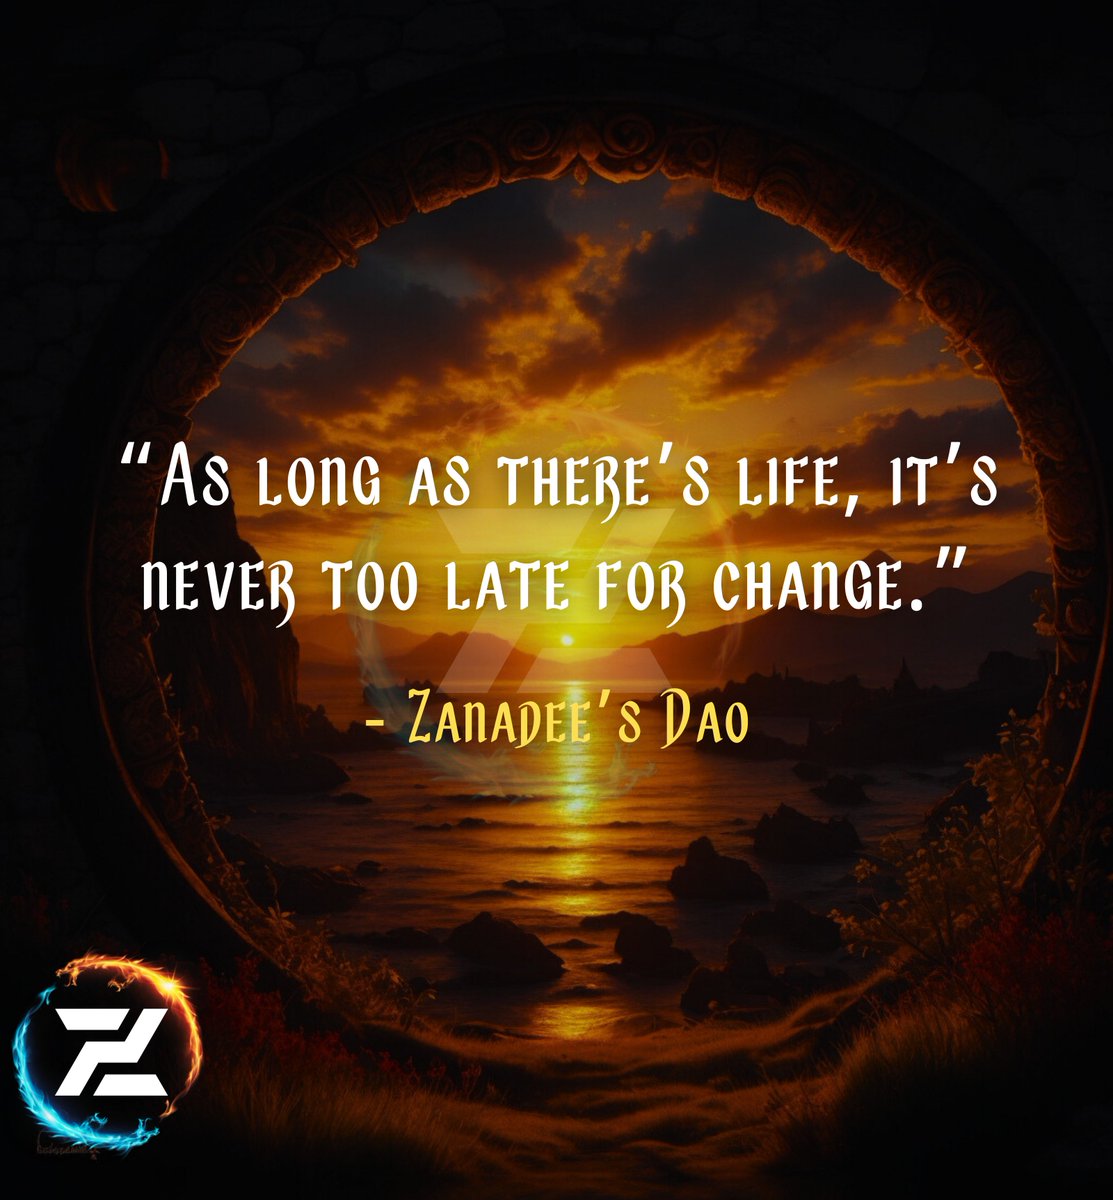 Life’s Opportunity

“As long as there’s life, it’s never too late for change.”

#GiftOfLife #Opportunity #PersonalGrowth #Transformation #SpiritualJourney

Zanadee’s Dao